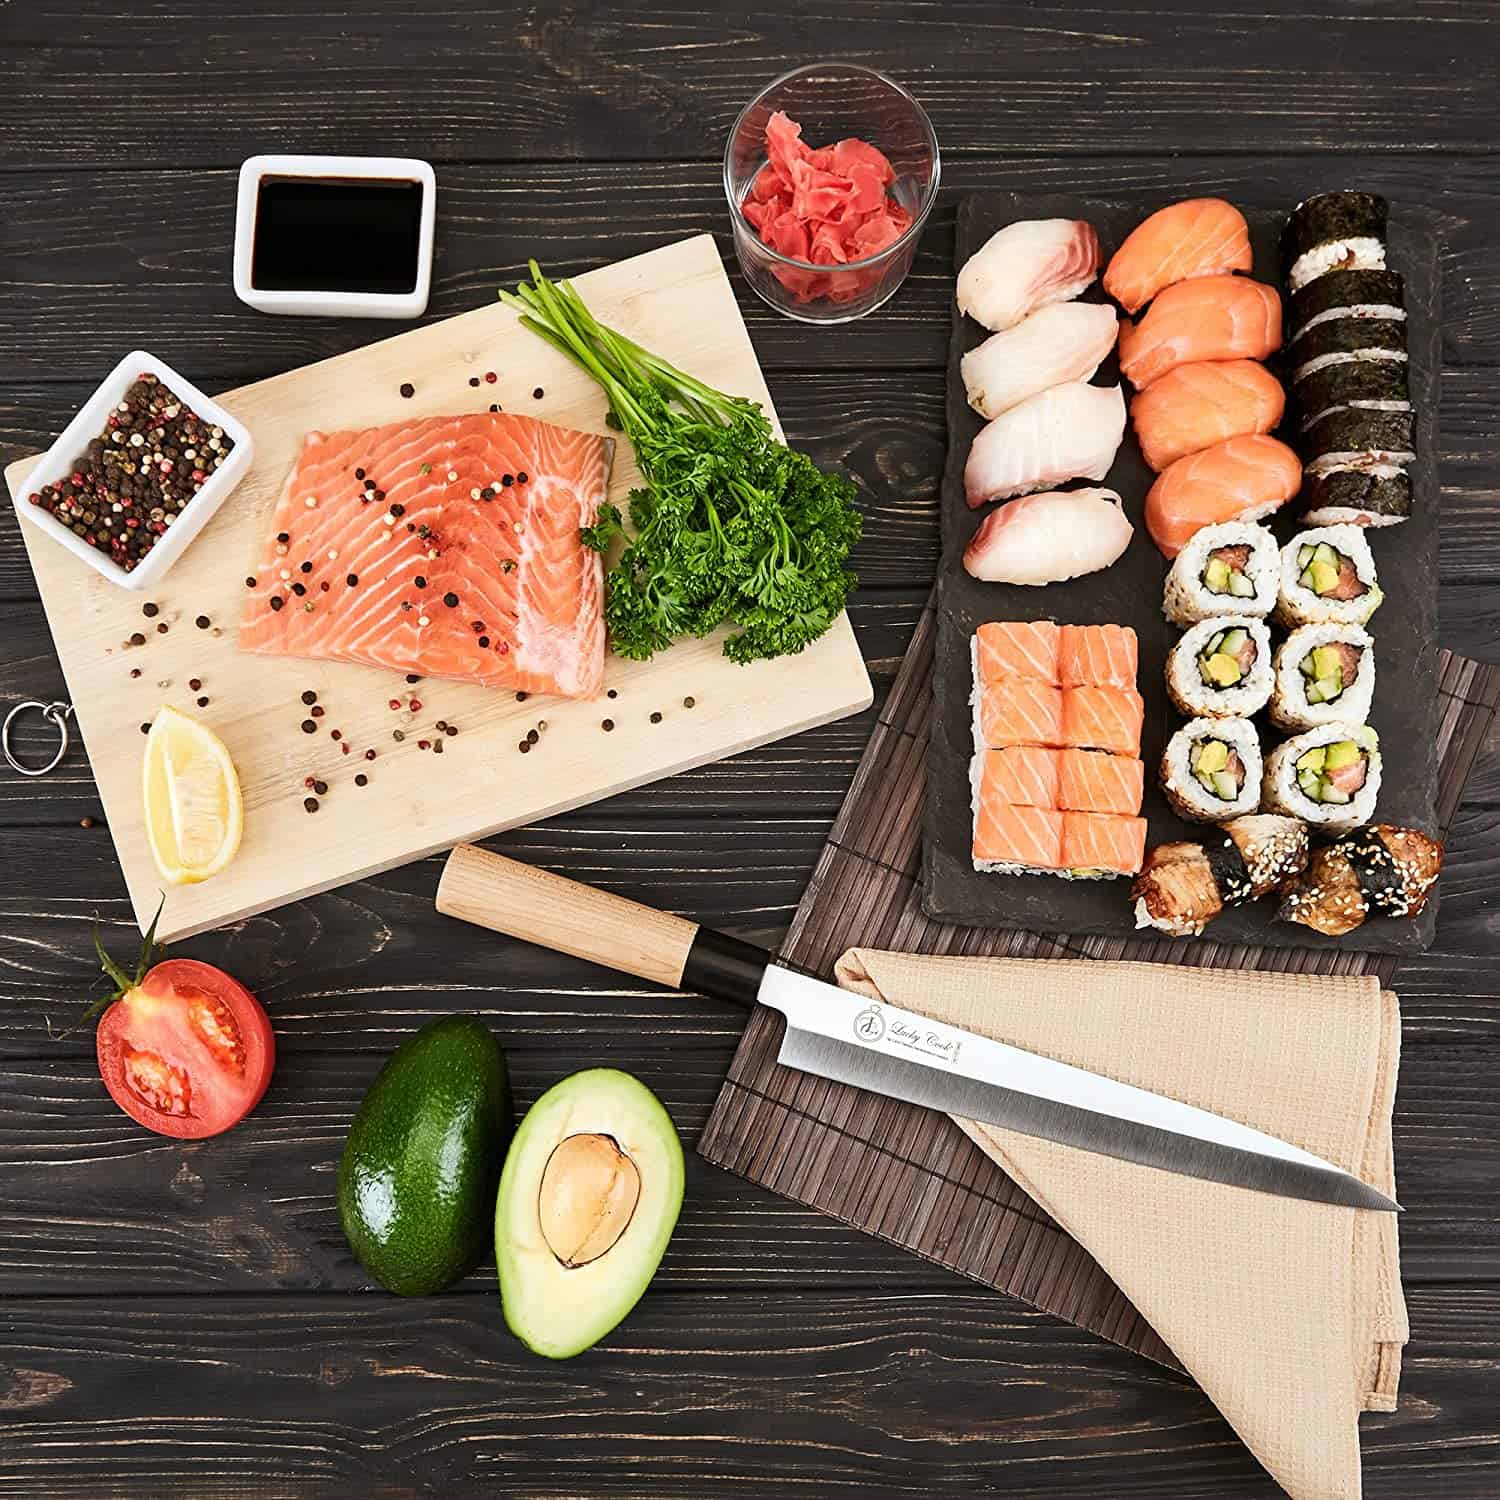 Sushi knife buying guide what to look for in a good knife